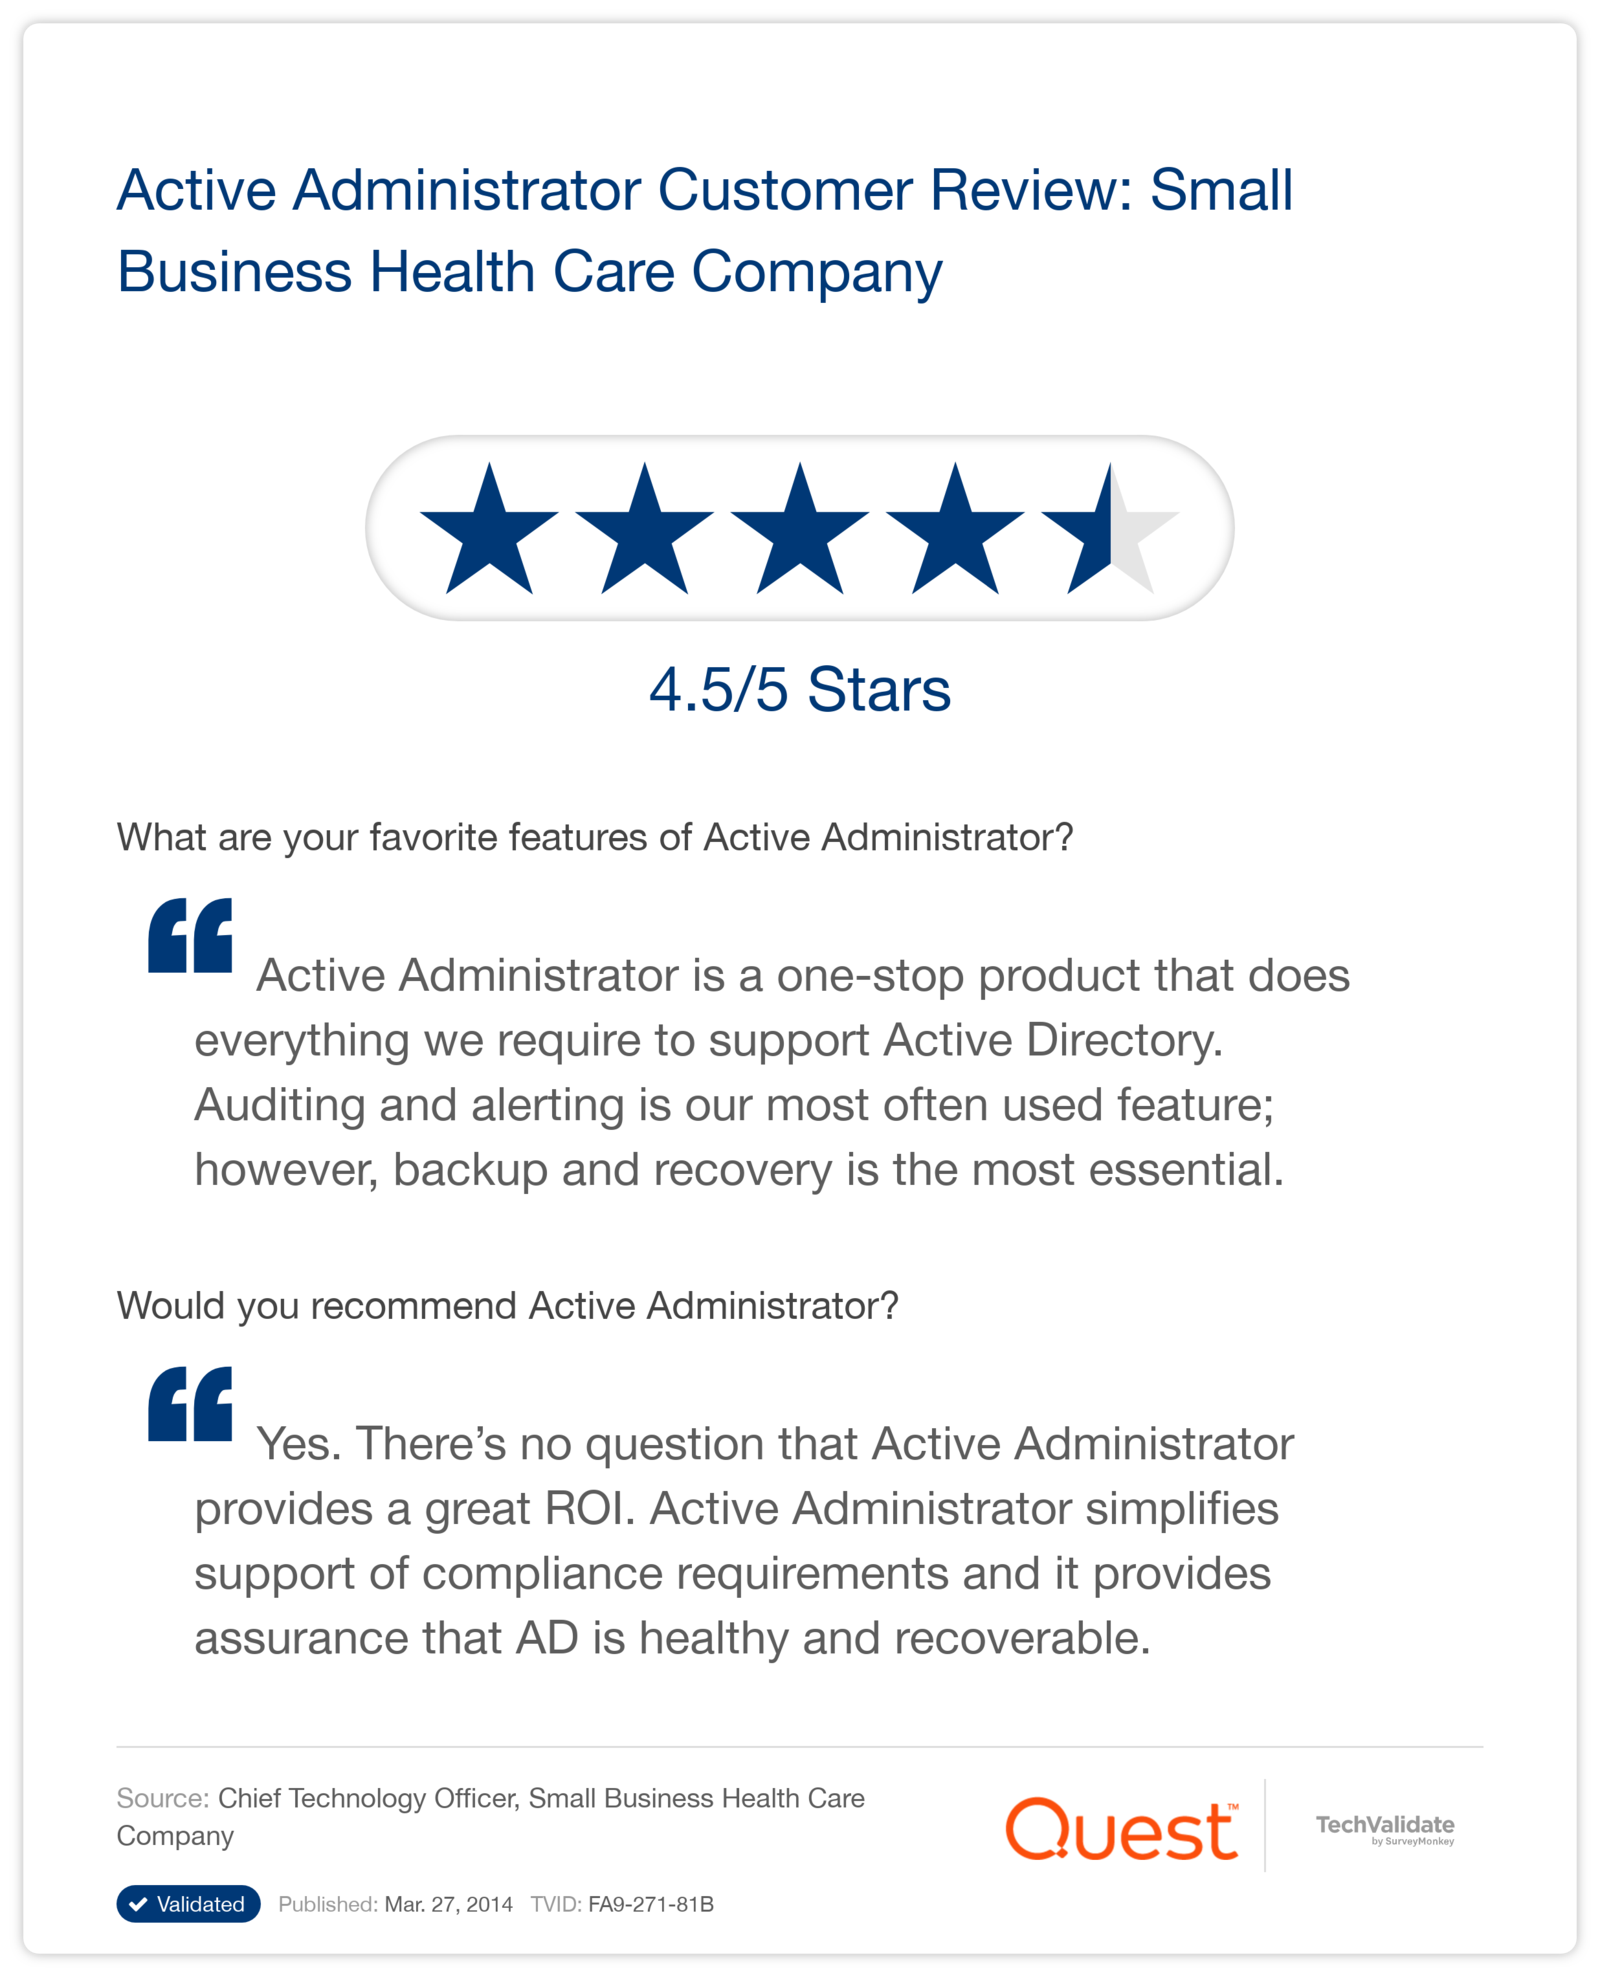 Active Administrator Customer Review: Small Business Health Care Company